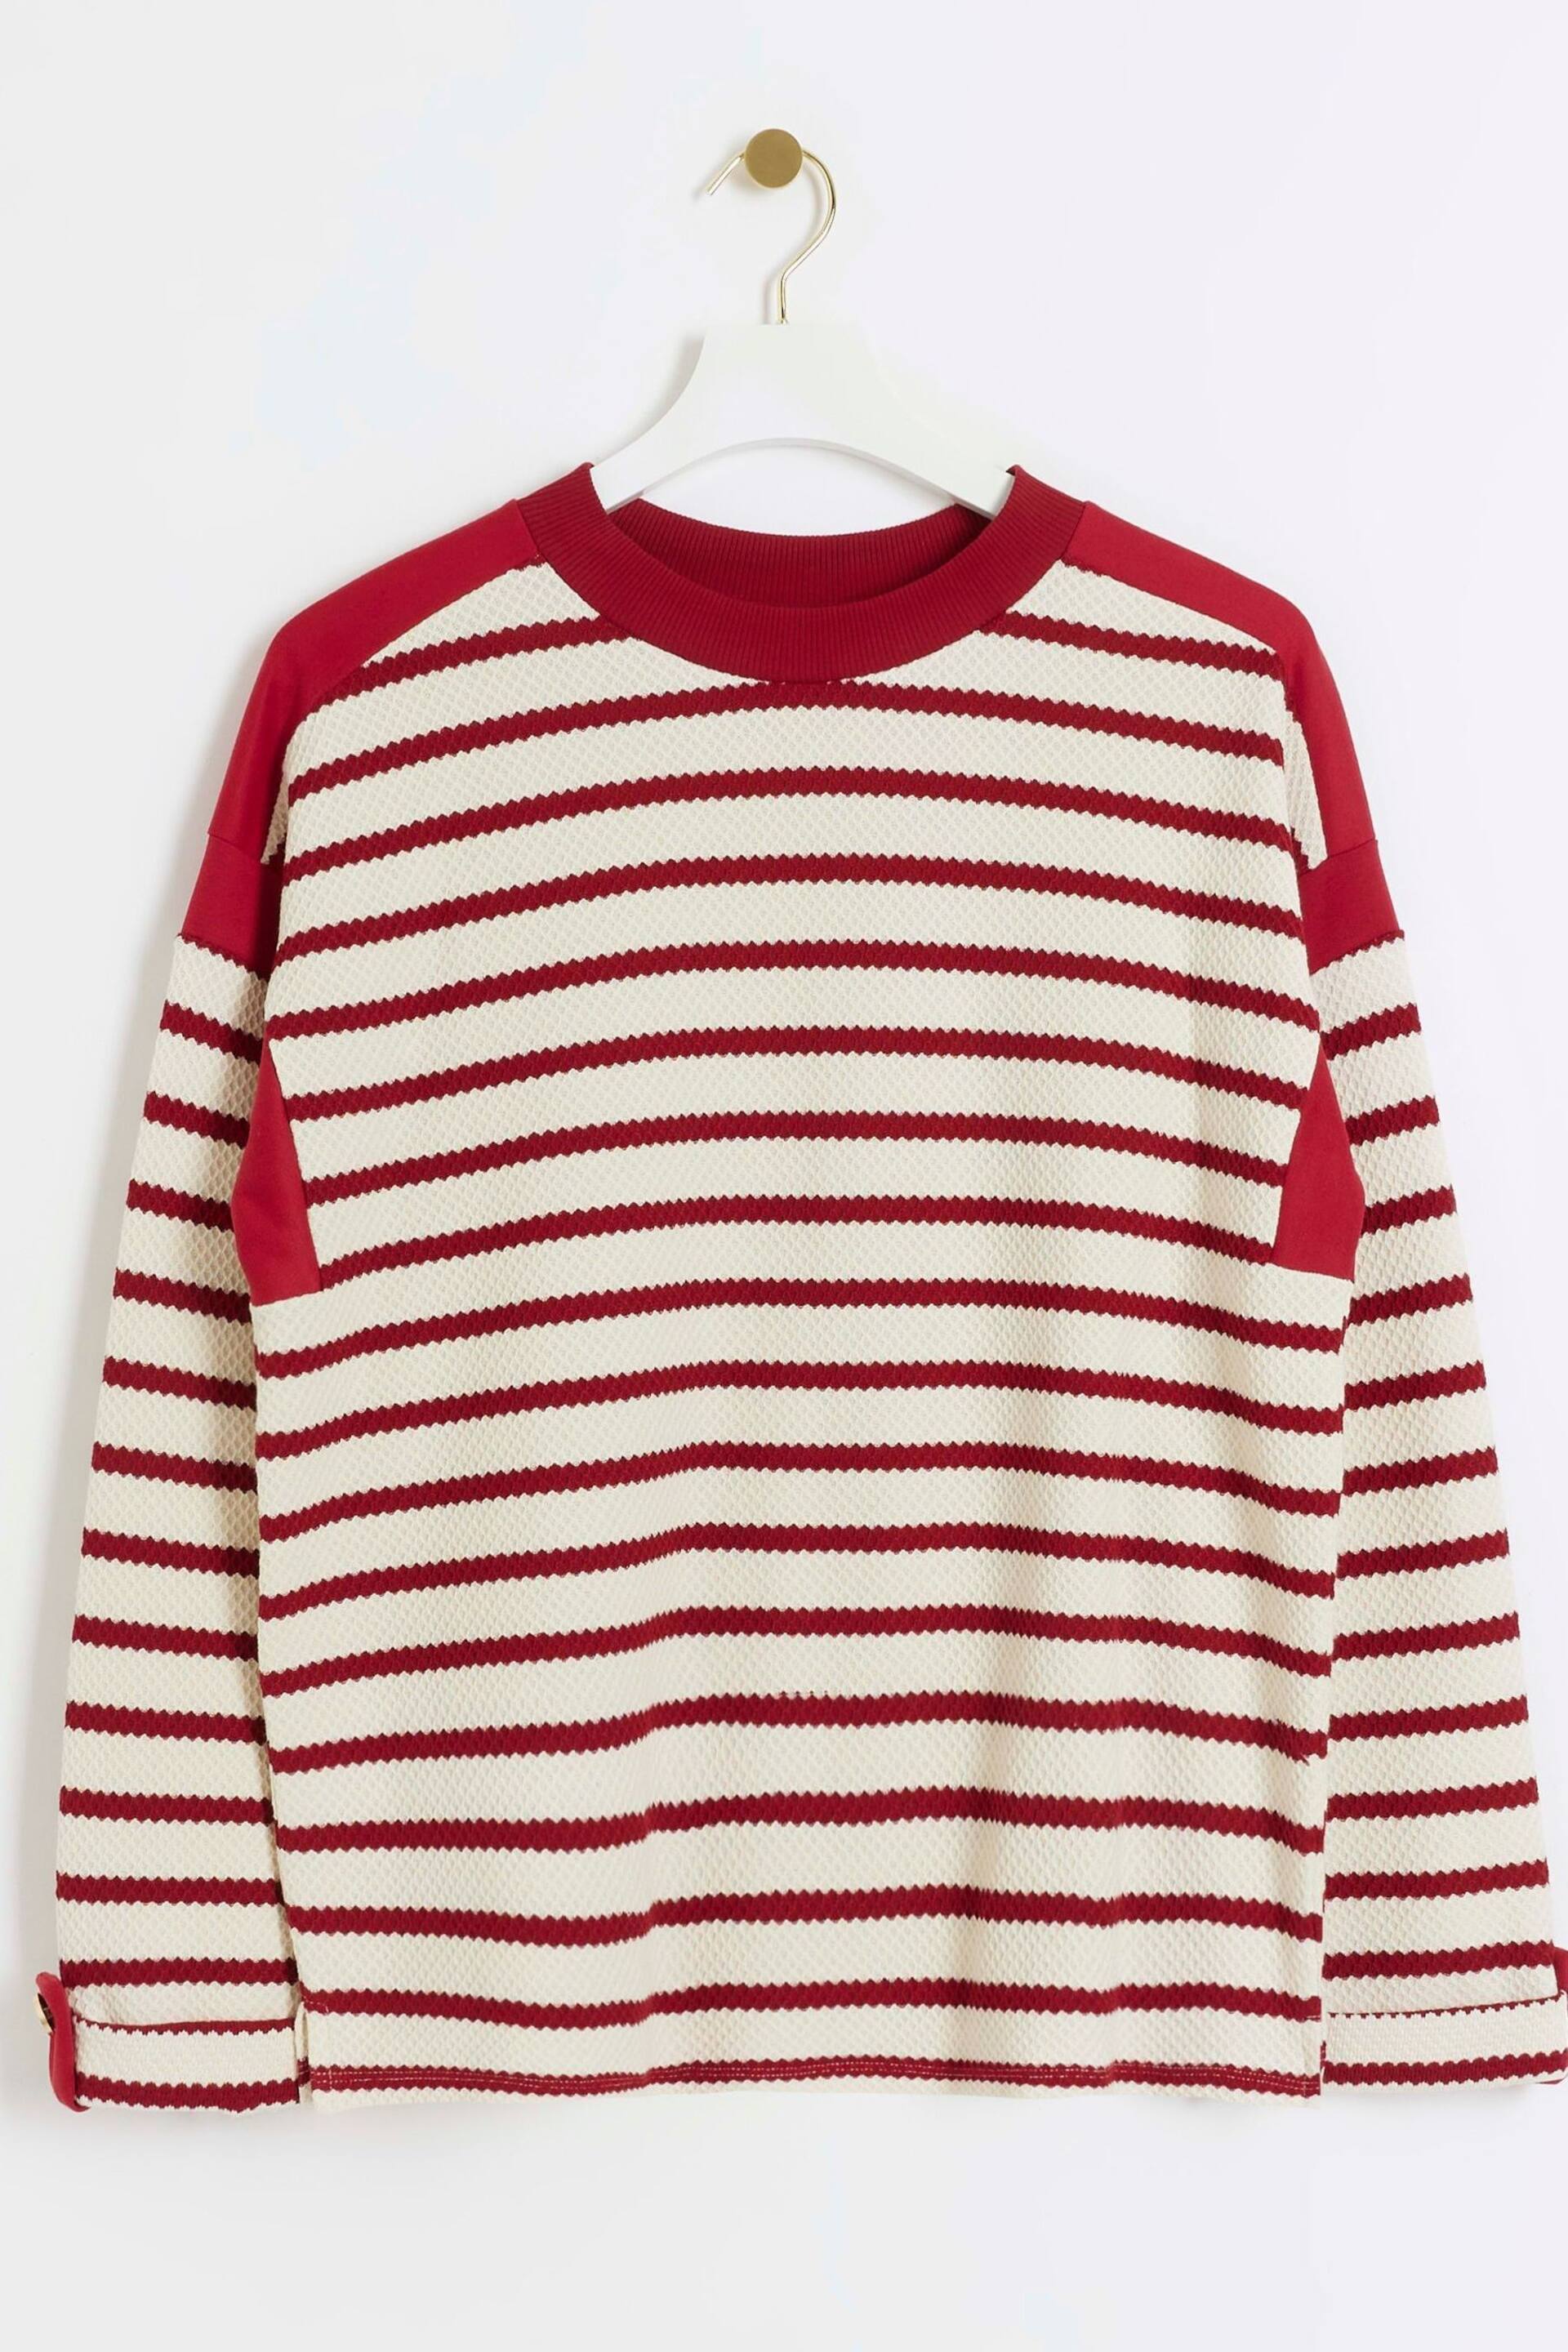 River Island Red Stripe Chuck On Sweat Top - Image 5 of 6